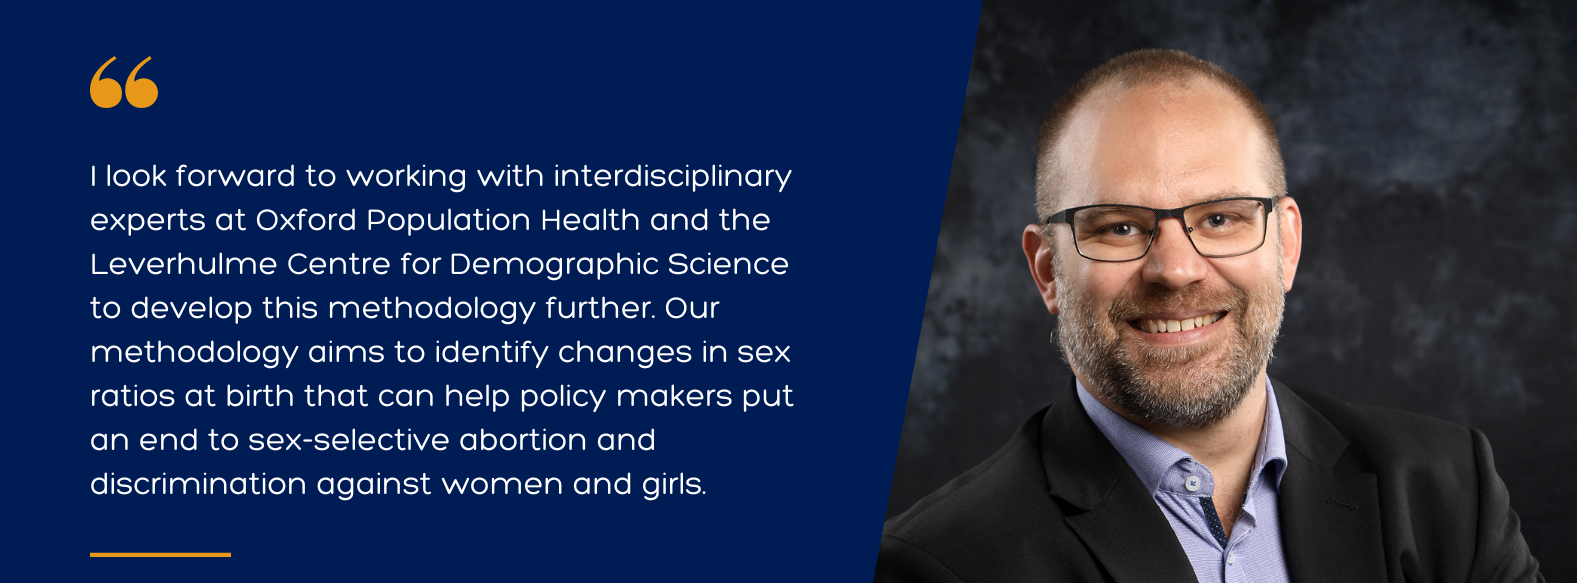 Quote from Dr Joshua Wilde, Senior Scientist and Researcher: 'I look forward to working with interdisciplinary experts at Oxford Population Health and the Leverhulme Centre for Demographic Science to develop this methodology further. Our methodology aims to identify changes in sex ratios at birth that can help policy makers put an end to sex-selective abortion and discrimination against women and girls.'